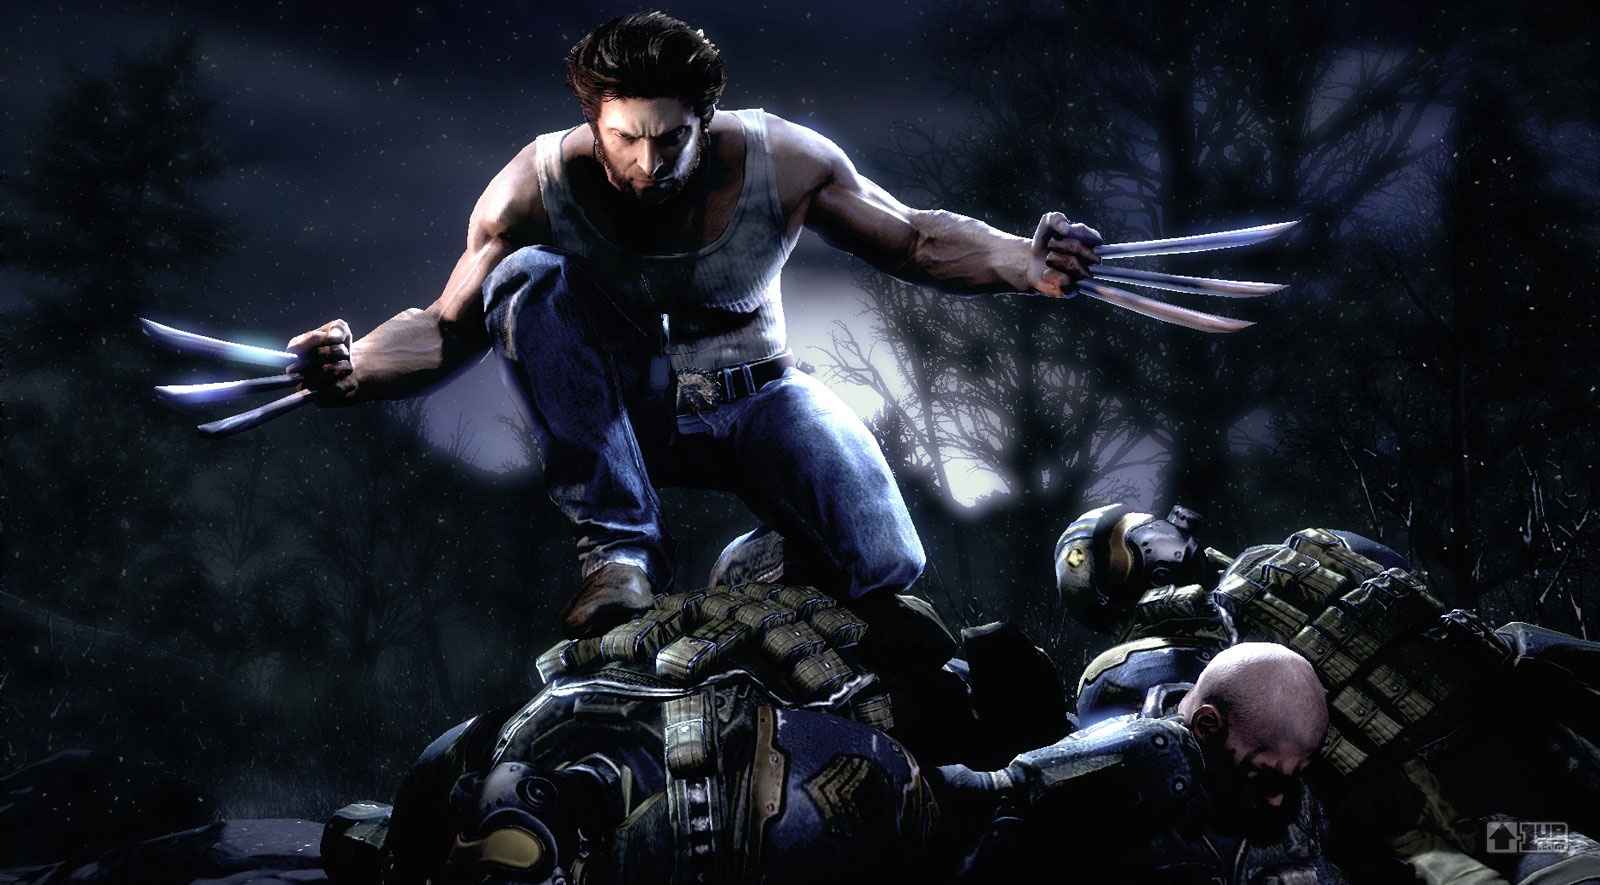 Wolverine PS3 Game: X Men Origins Shows Its Face